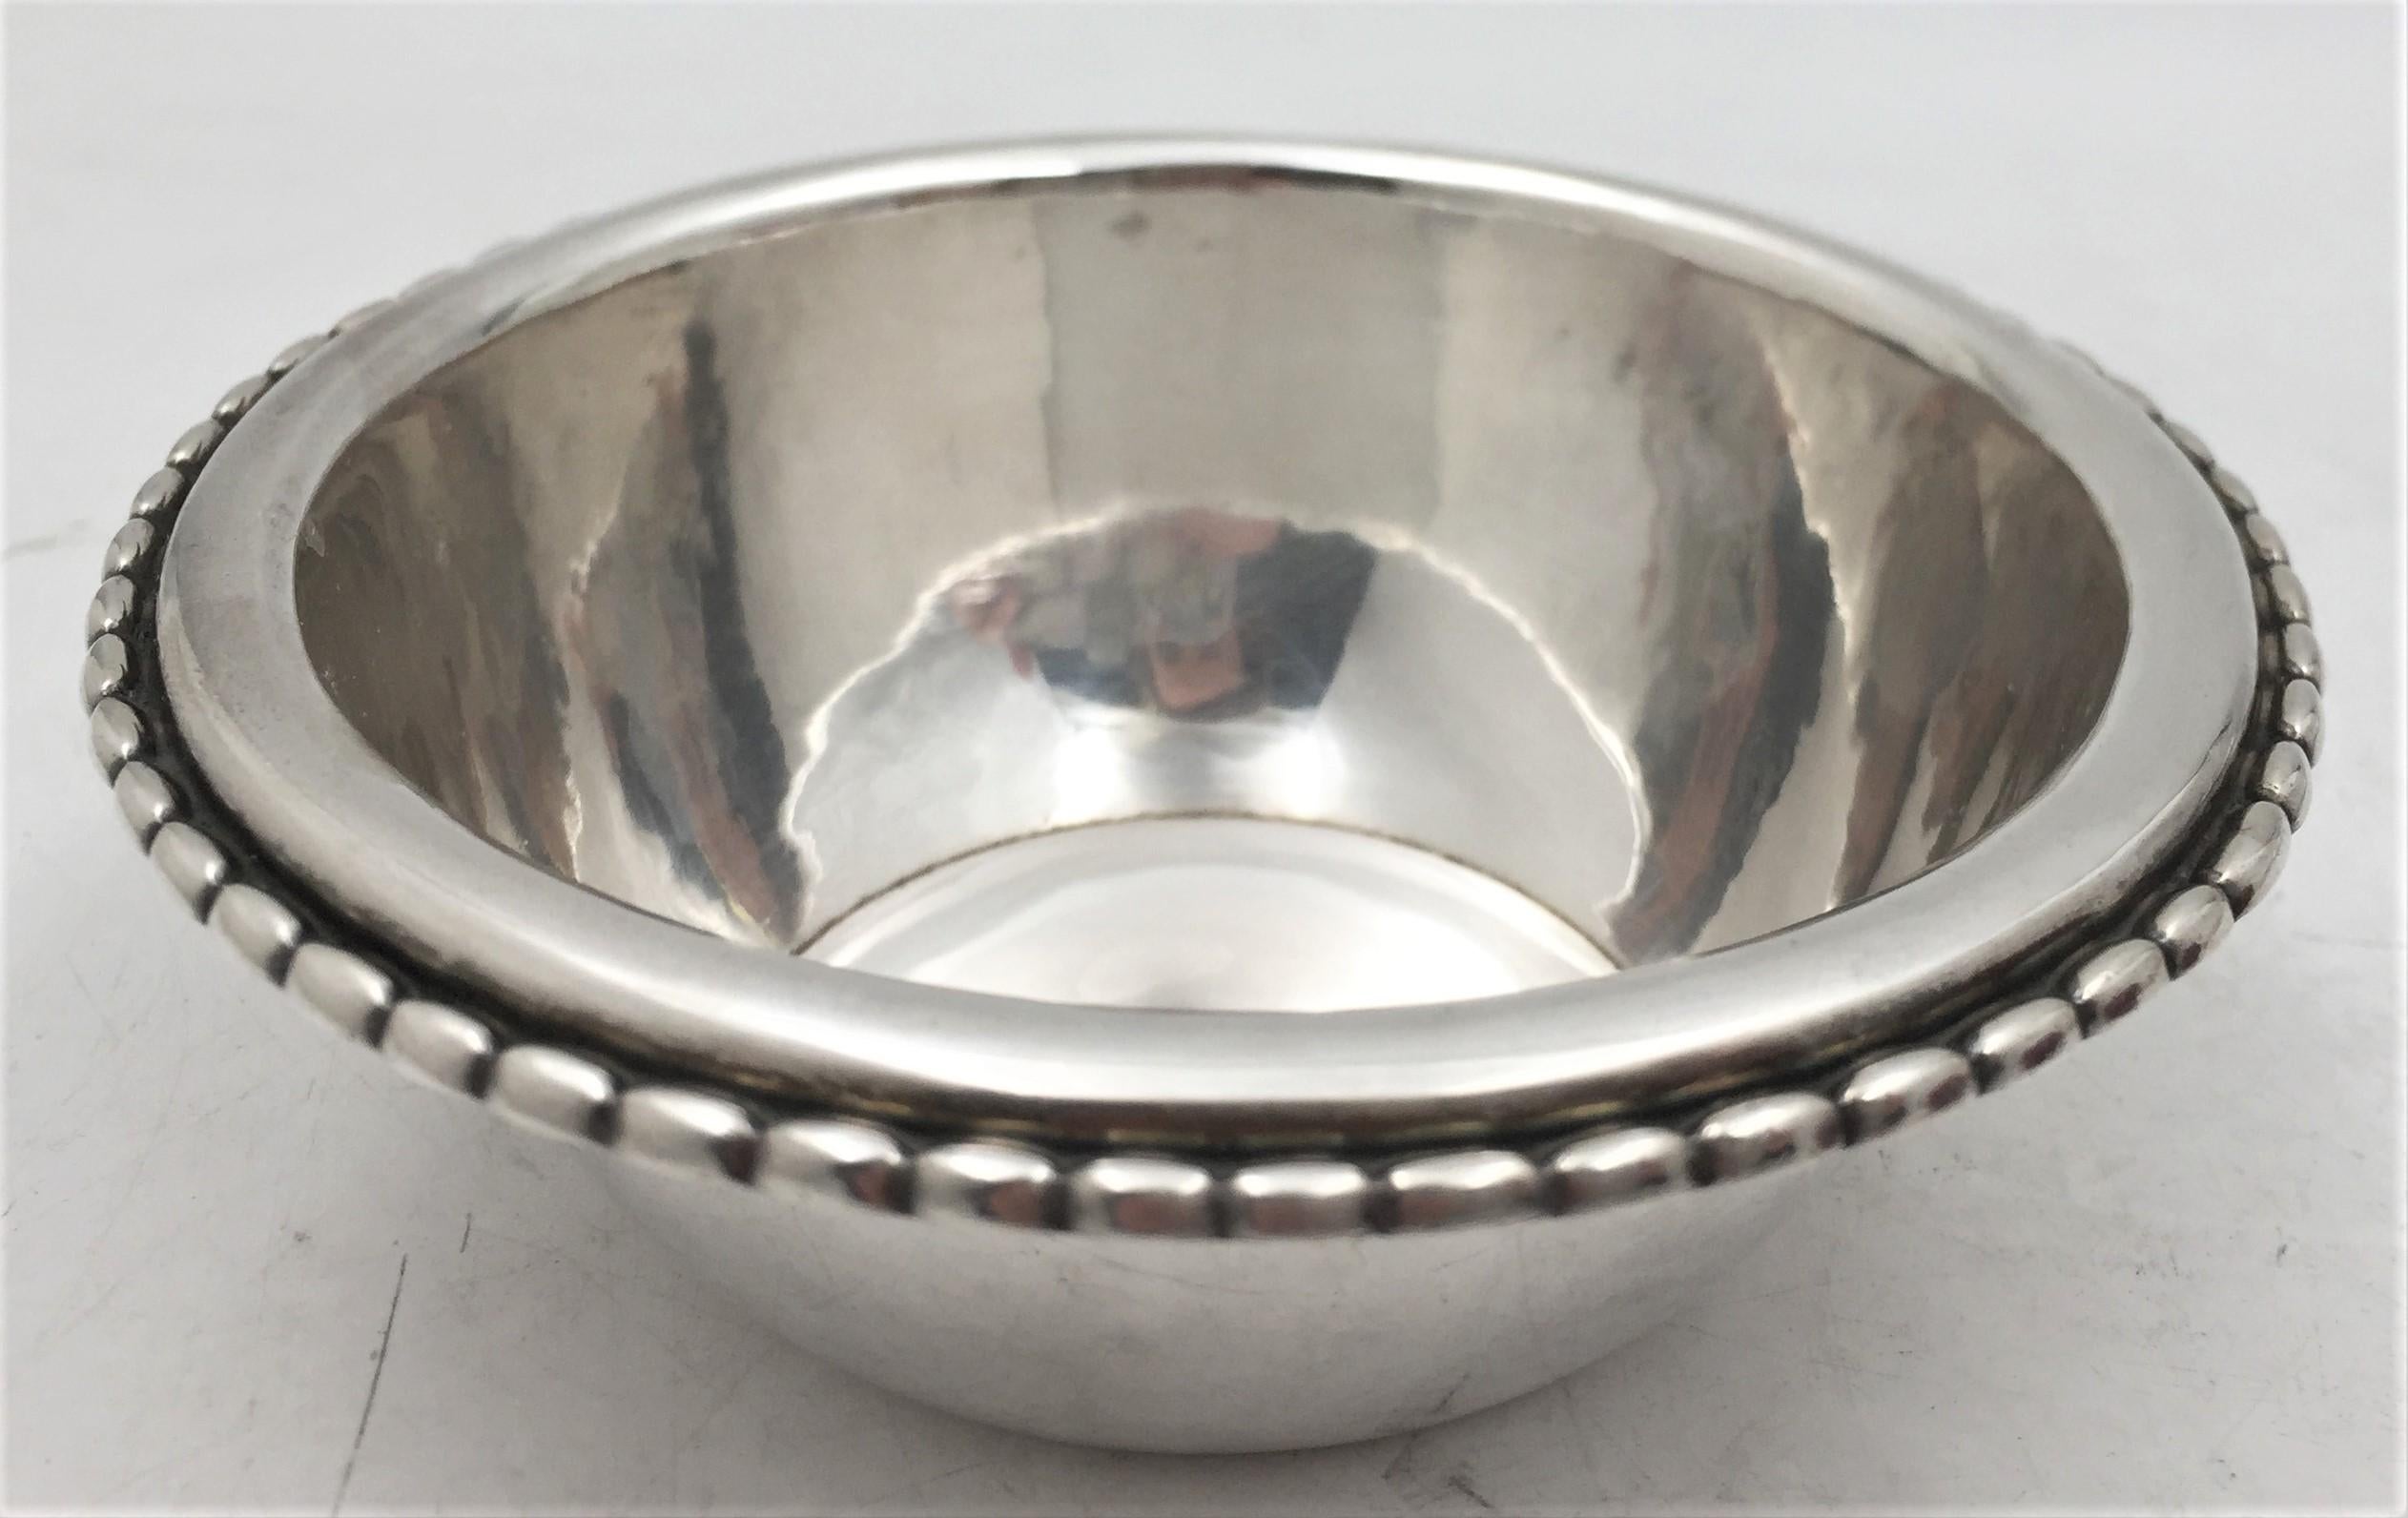 Georg Jensen, sterling silver, hand hammered dish or bowl, made between 1925 and 1932, in Rope pattern number 290. It measures 5'' in diameter by 1 3/4'' in height and bears early hallmarks as well as an inscription as shown. 

Danish silversmith